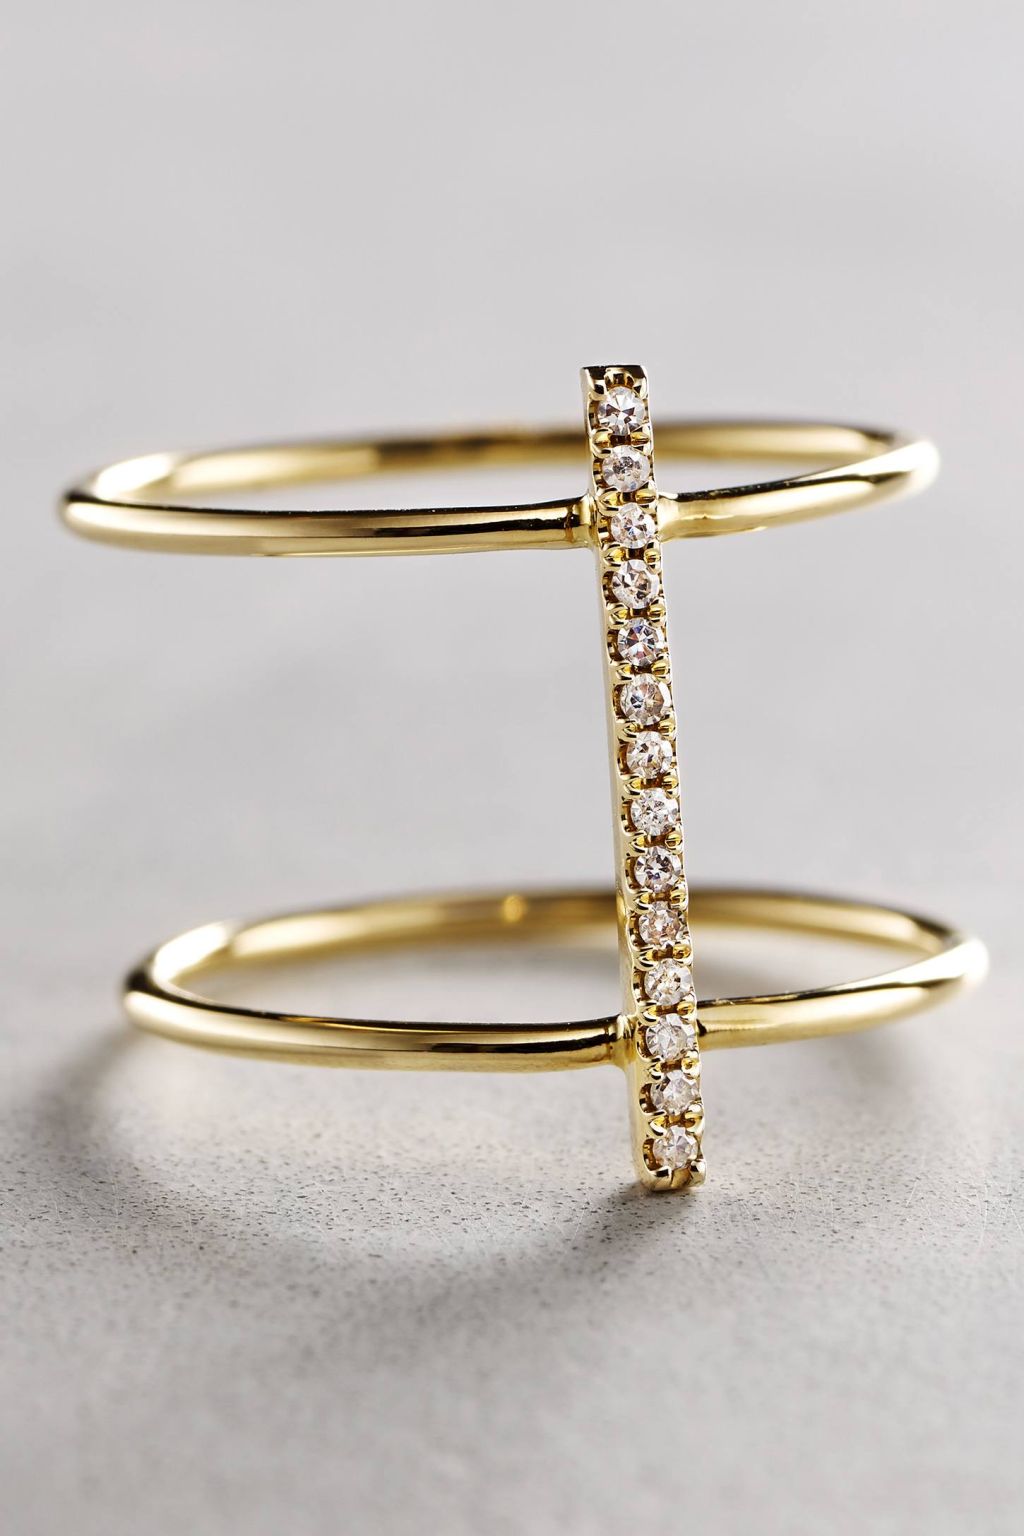 Diamond Cuff Ring in 14k Gold by Liven Co.